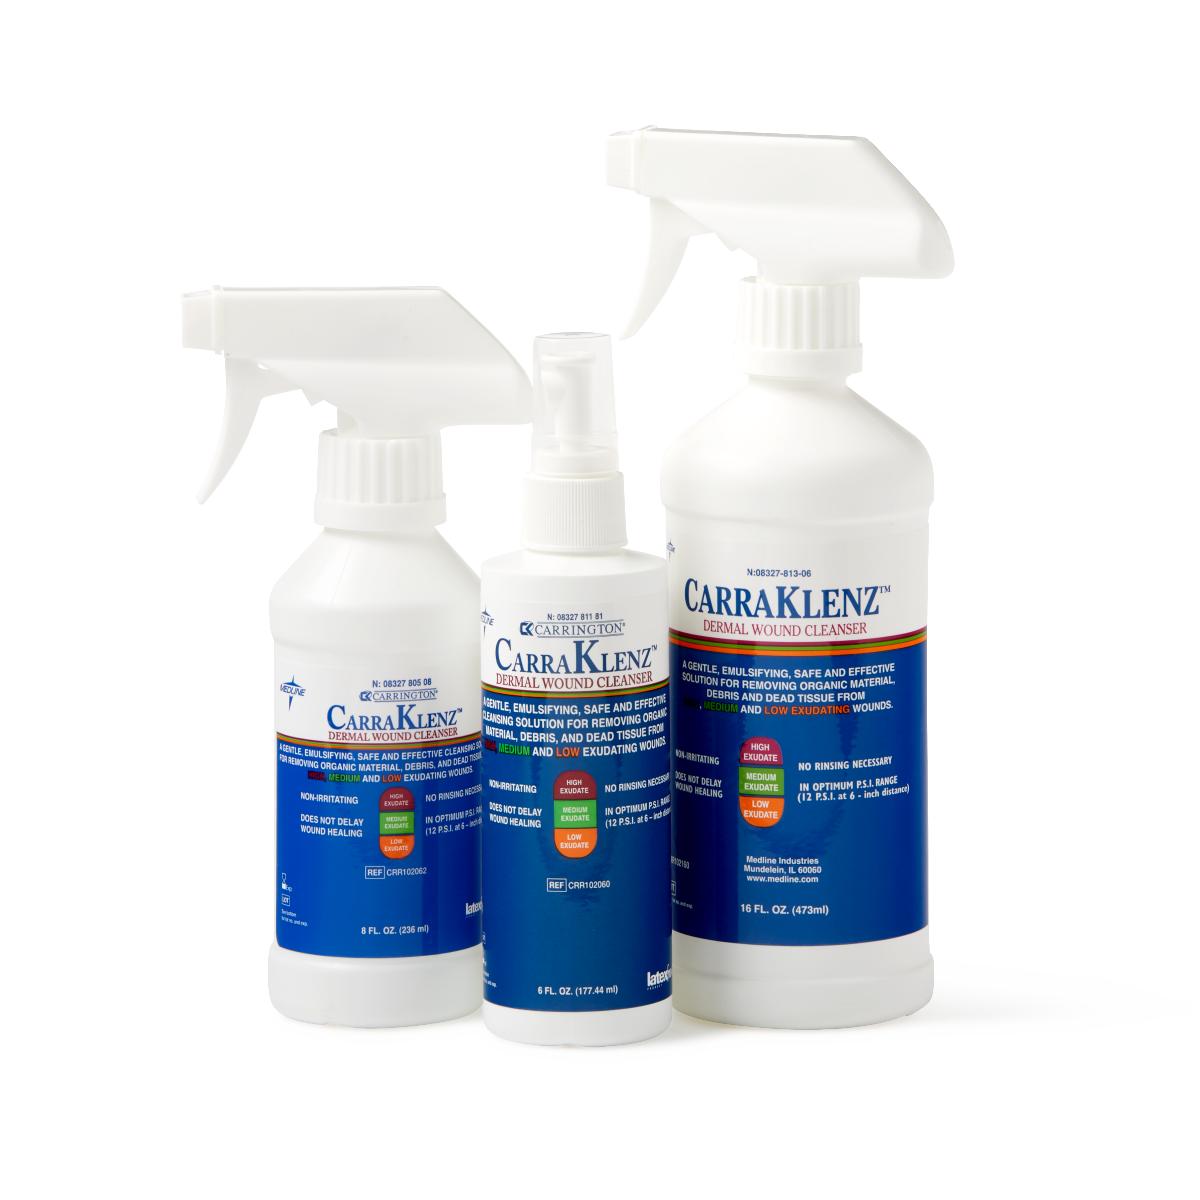 Wound Cleansers - Wound Care Cleansers, Cleaners & Disinfectants